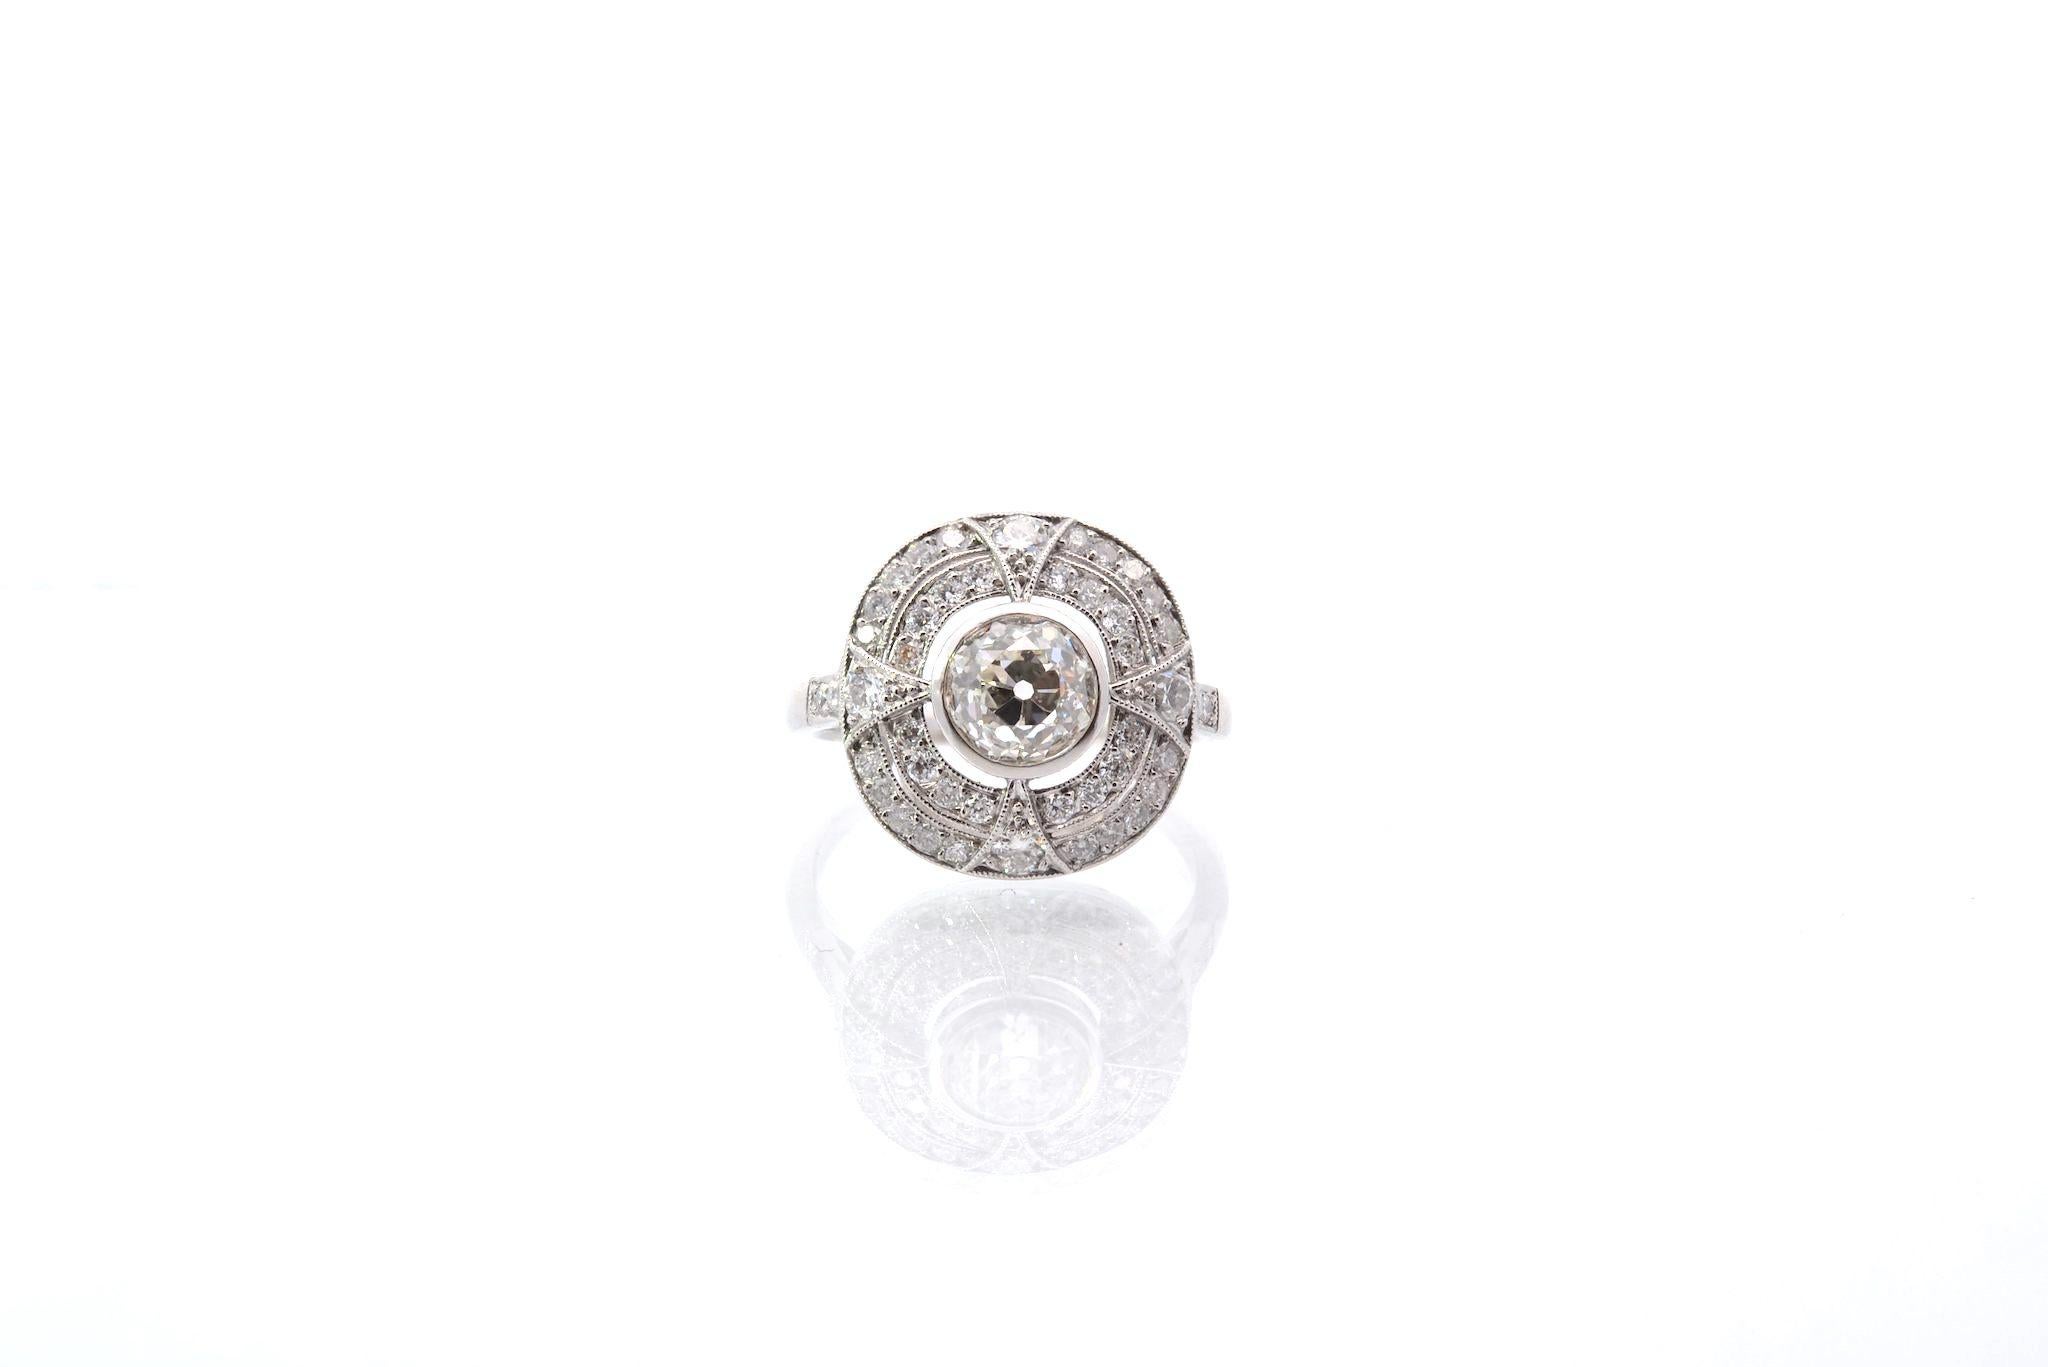 Stones: 1 diamond of 1.23 cts old cut I SI1, 46 diamonds: 0.50ct
Material: Platinum
Dimensions: 1.3cm
Weight: 6g
Period: Recent handmade art deco style
Size: 54 (free sizing)
Certificate
Ref. : 25363 25309